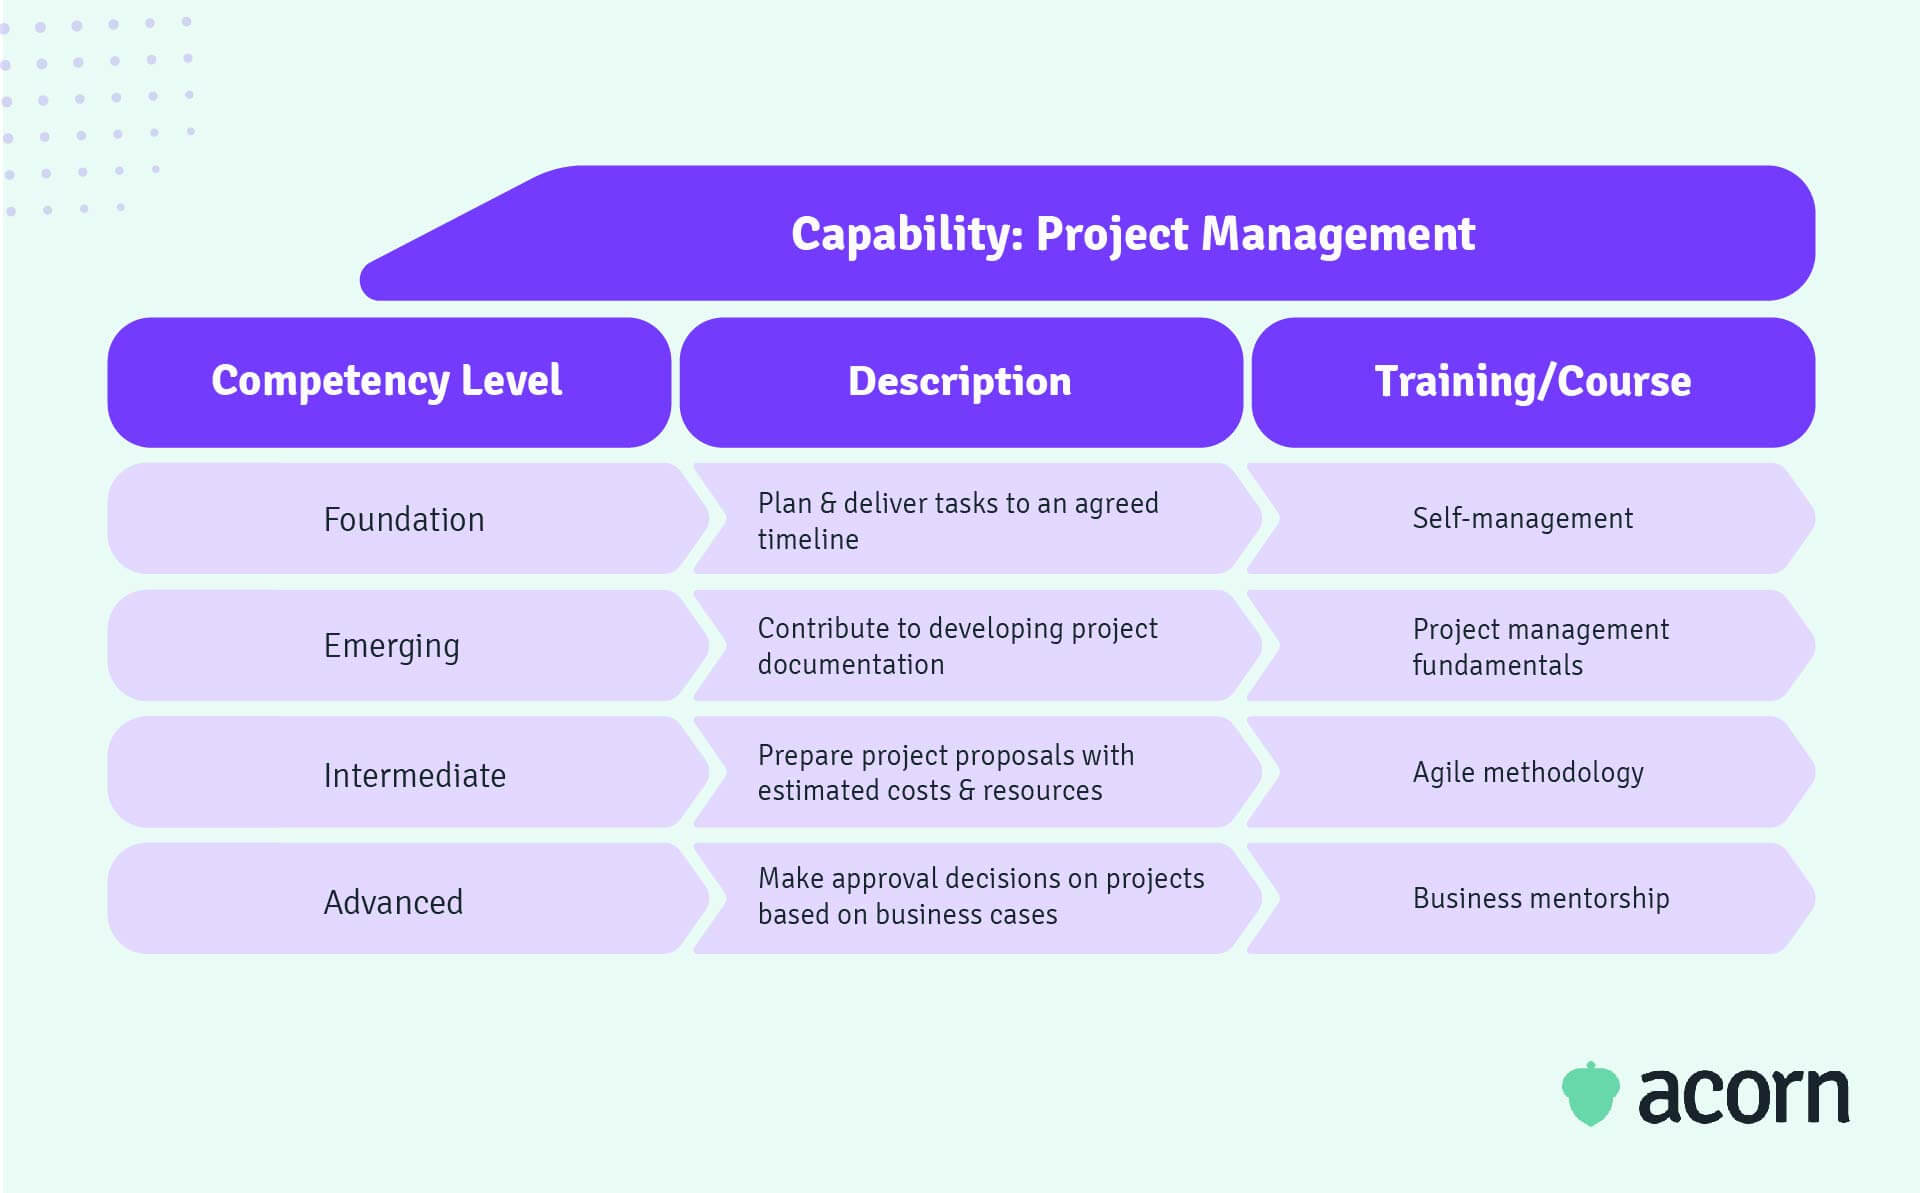 Table showing the ascending levels of proficiency for a project management capability 